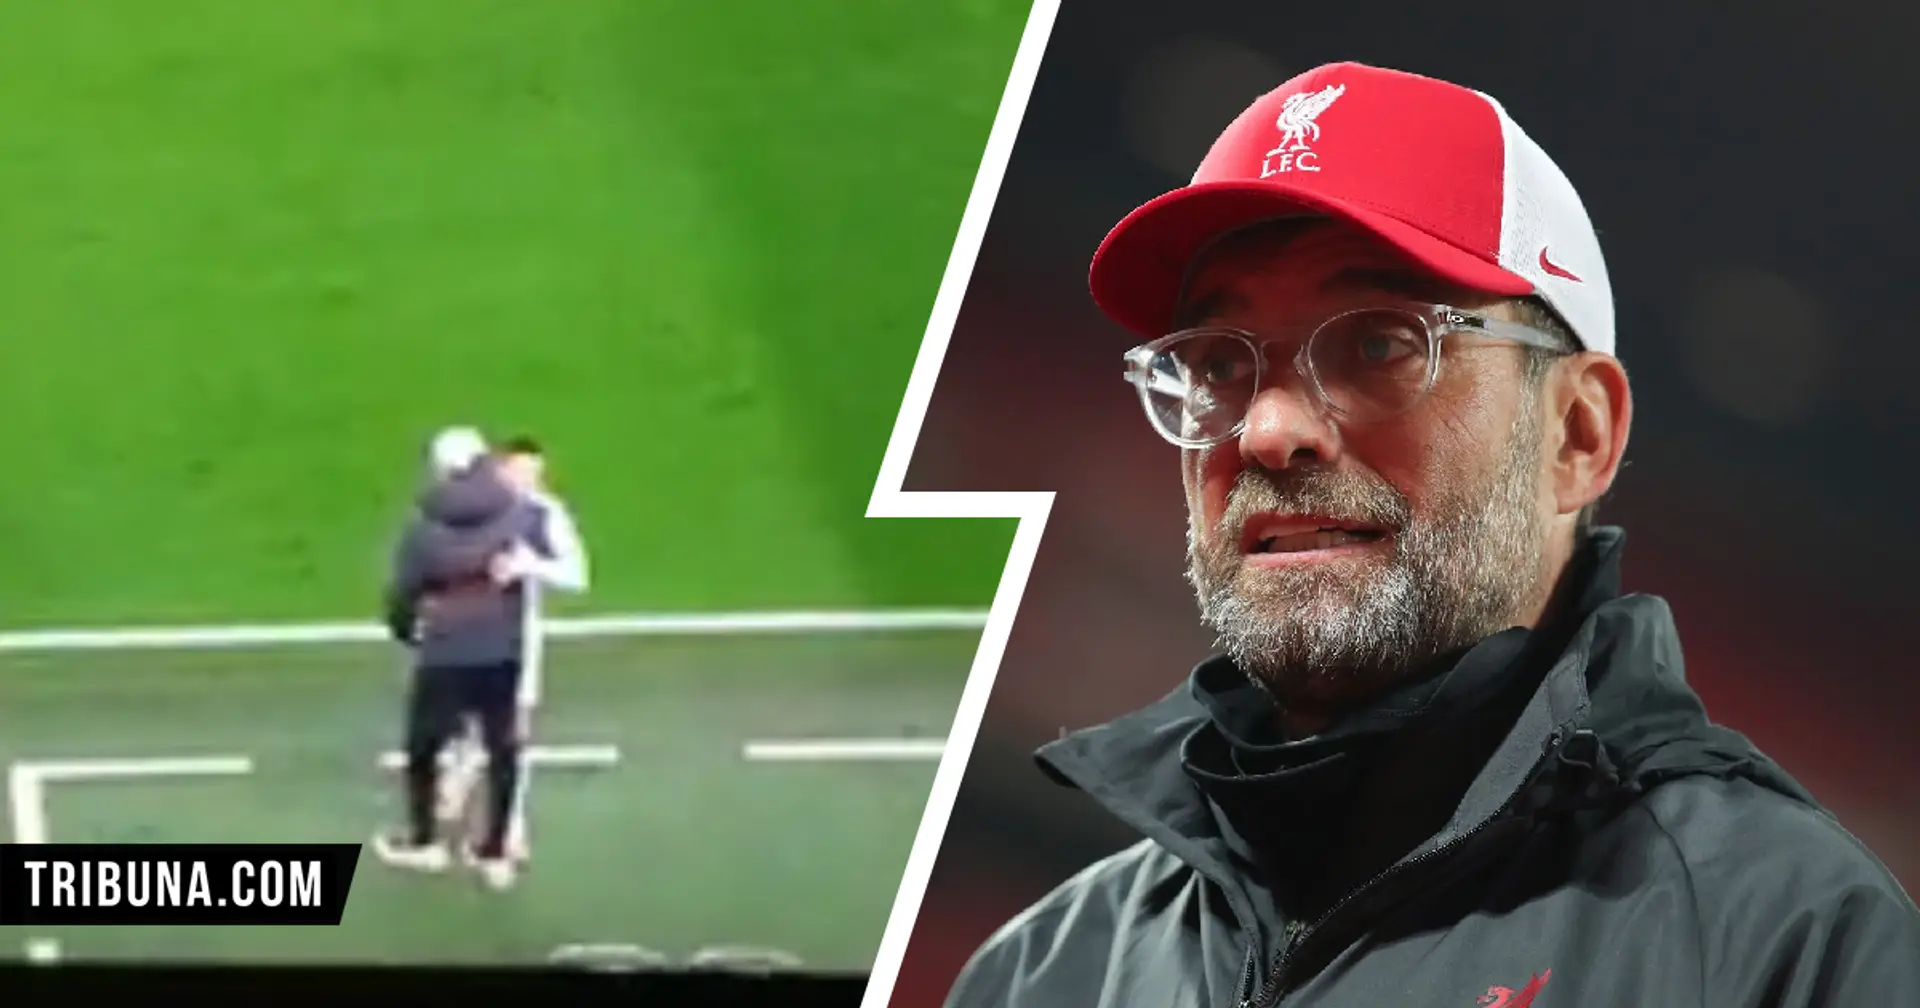 'Everyone wants a Kloppo hug': LFC fan on Reddit shares funny moment from Atalanta game